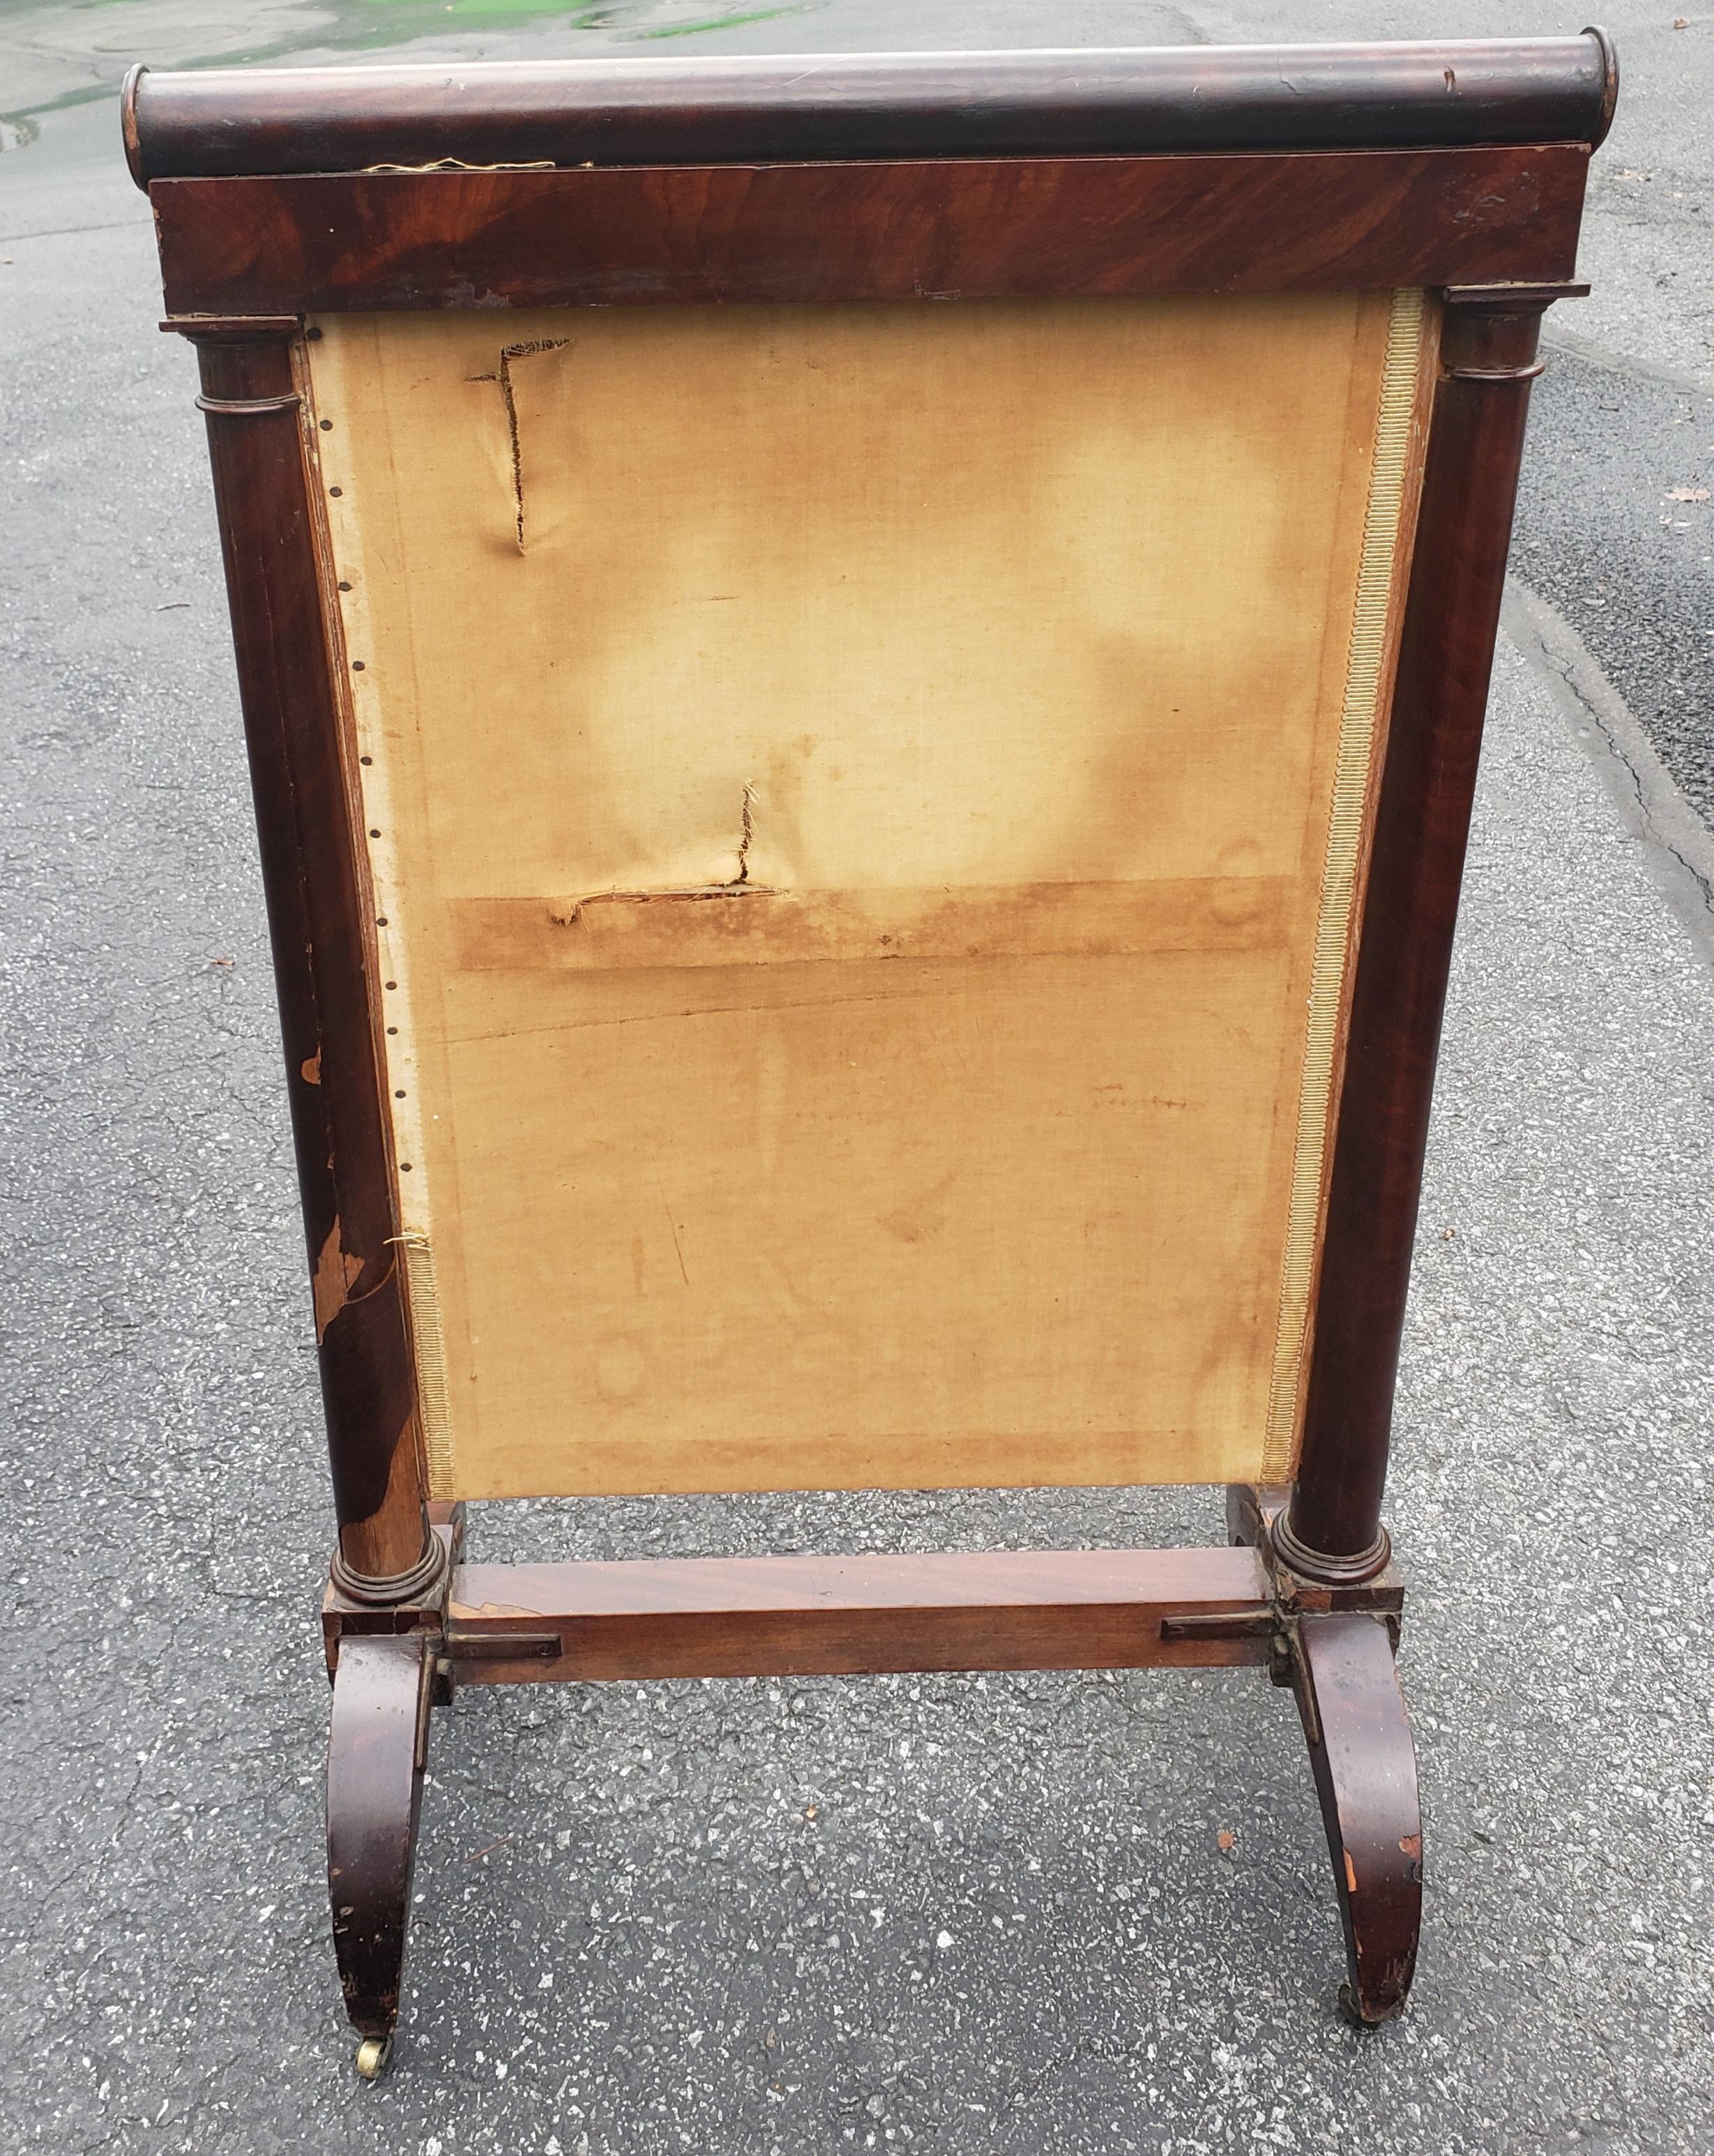 19th Century American Empire Mahogany and Needlepoint Fire Screen on Wheels For Sale 4